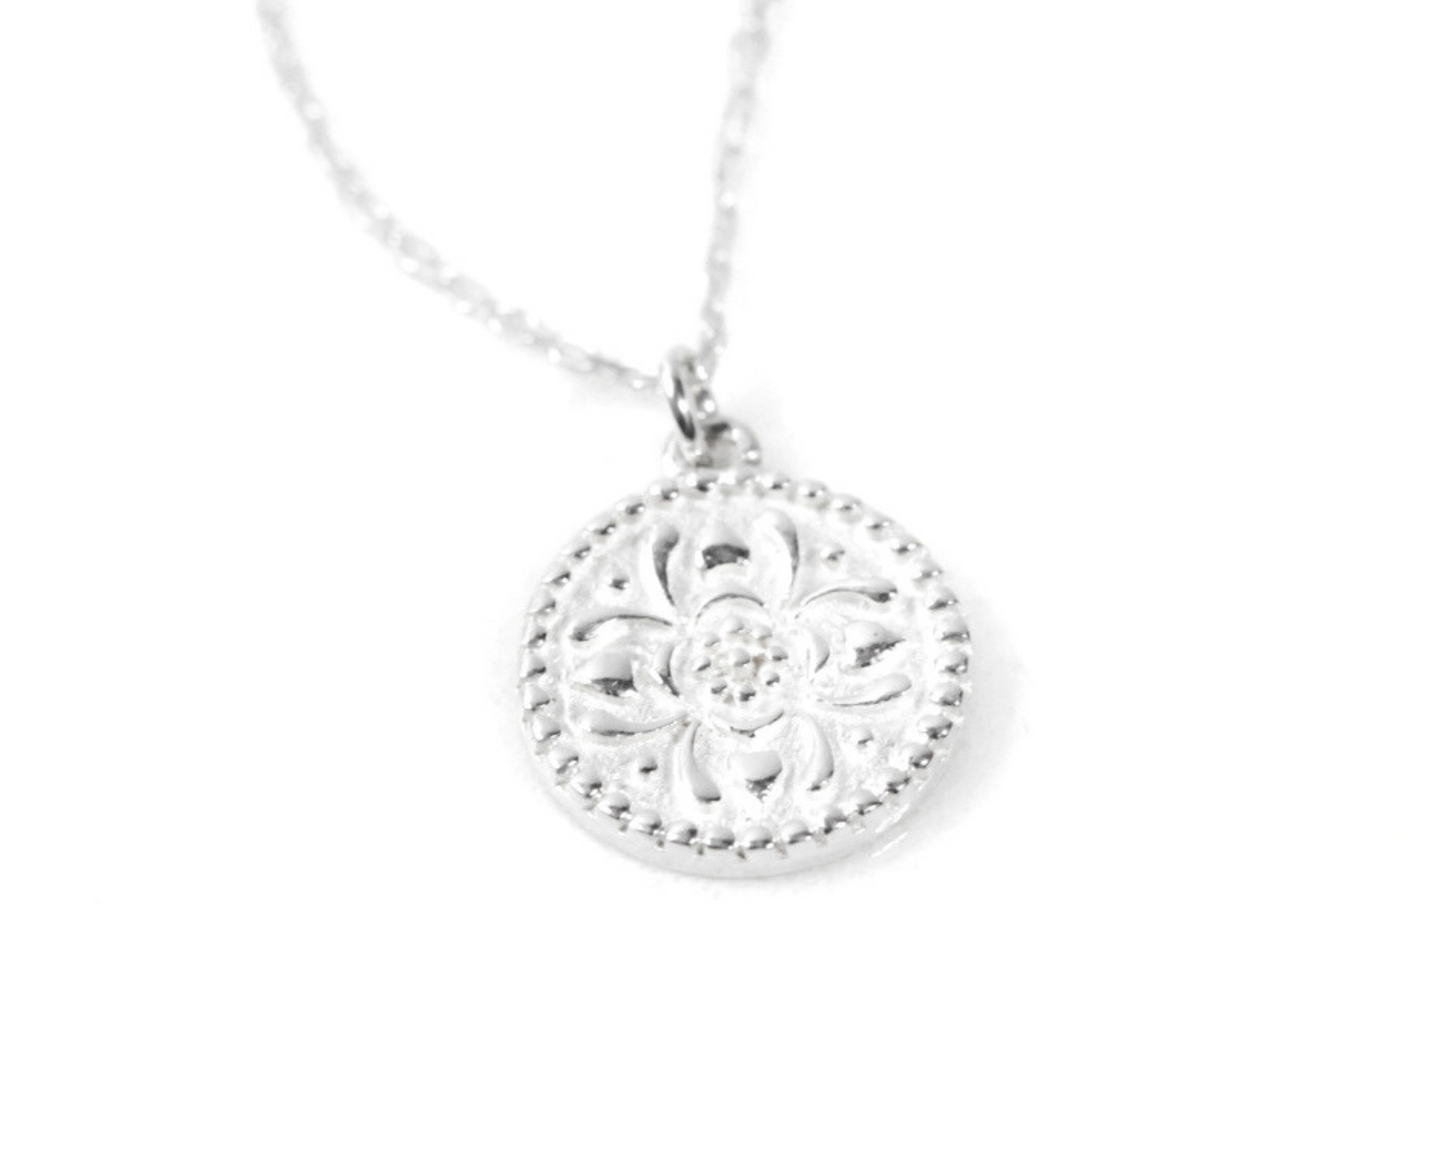 An artistic floral motif gleams from the 1/2 inch Silver coin pendant. Dots, hearts, and arching petal shapes radiate outward. This silver flower necklace is handcrafted entirely in 925 Sterling Silver, complete with our 1.1mm Sterling Silver chain.